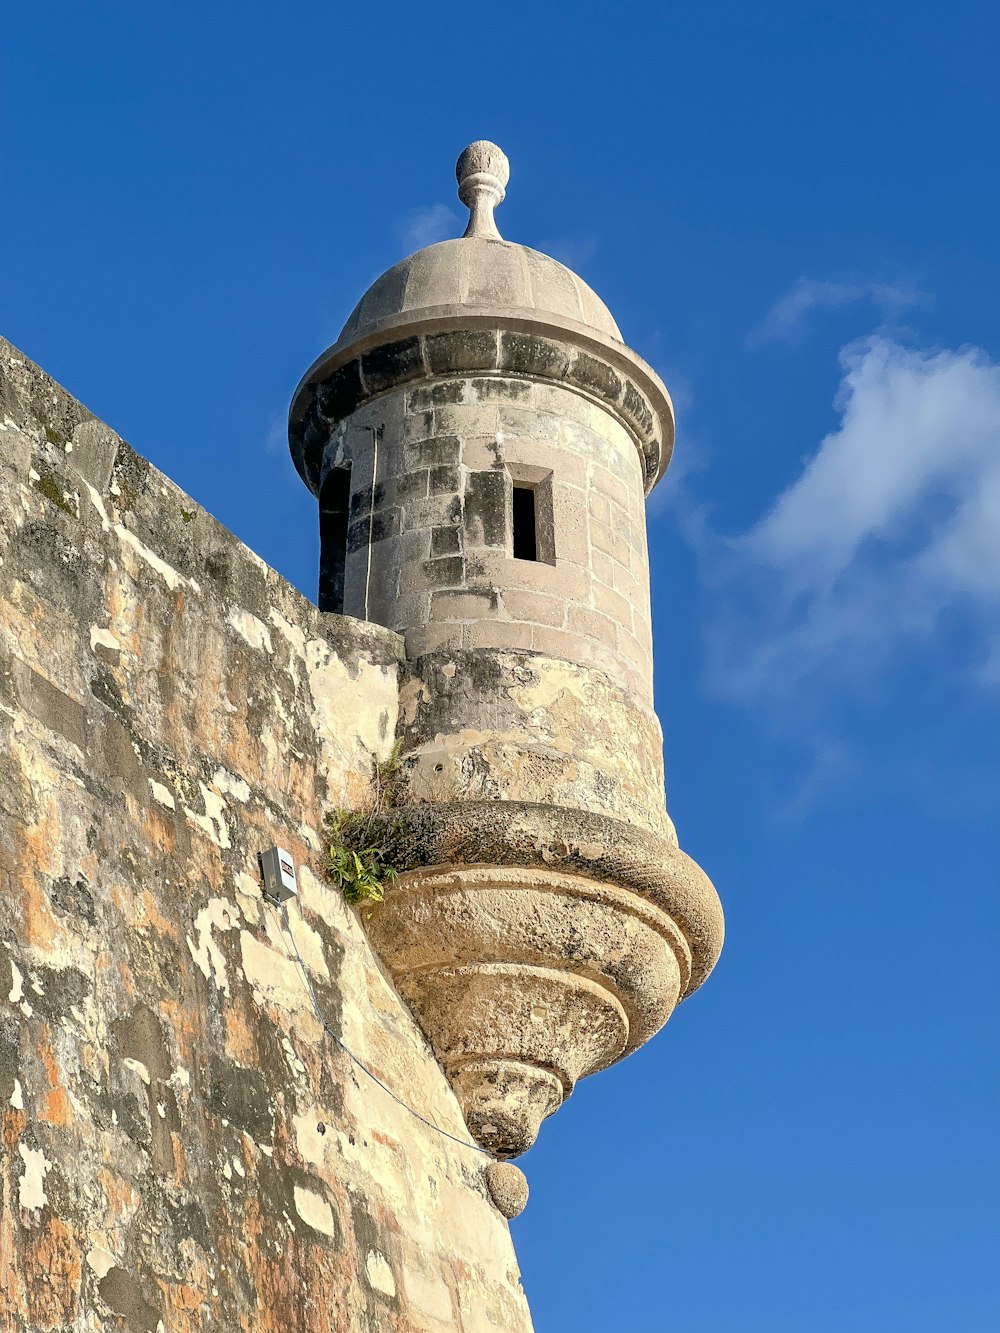 a stone tower with a round top